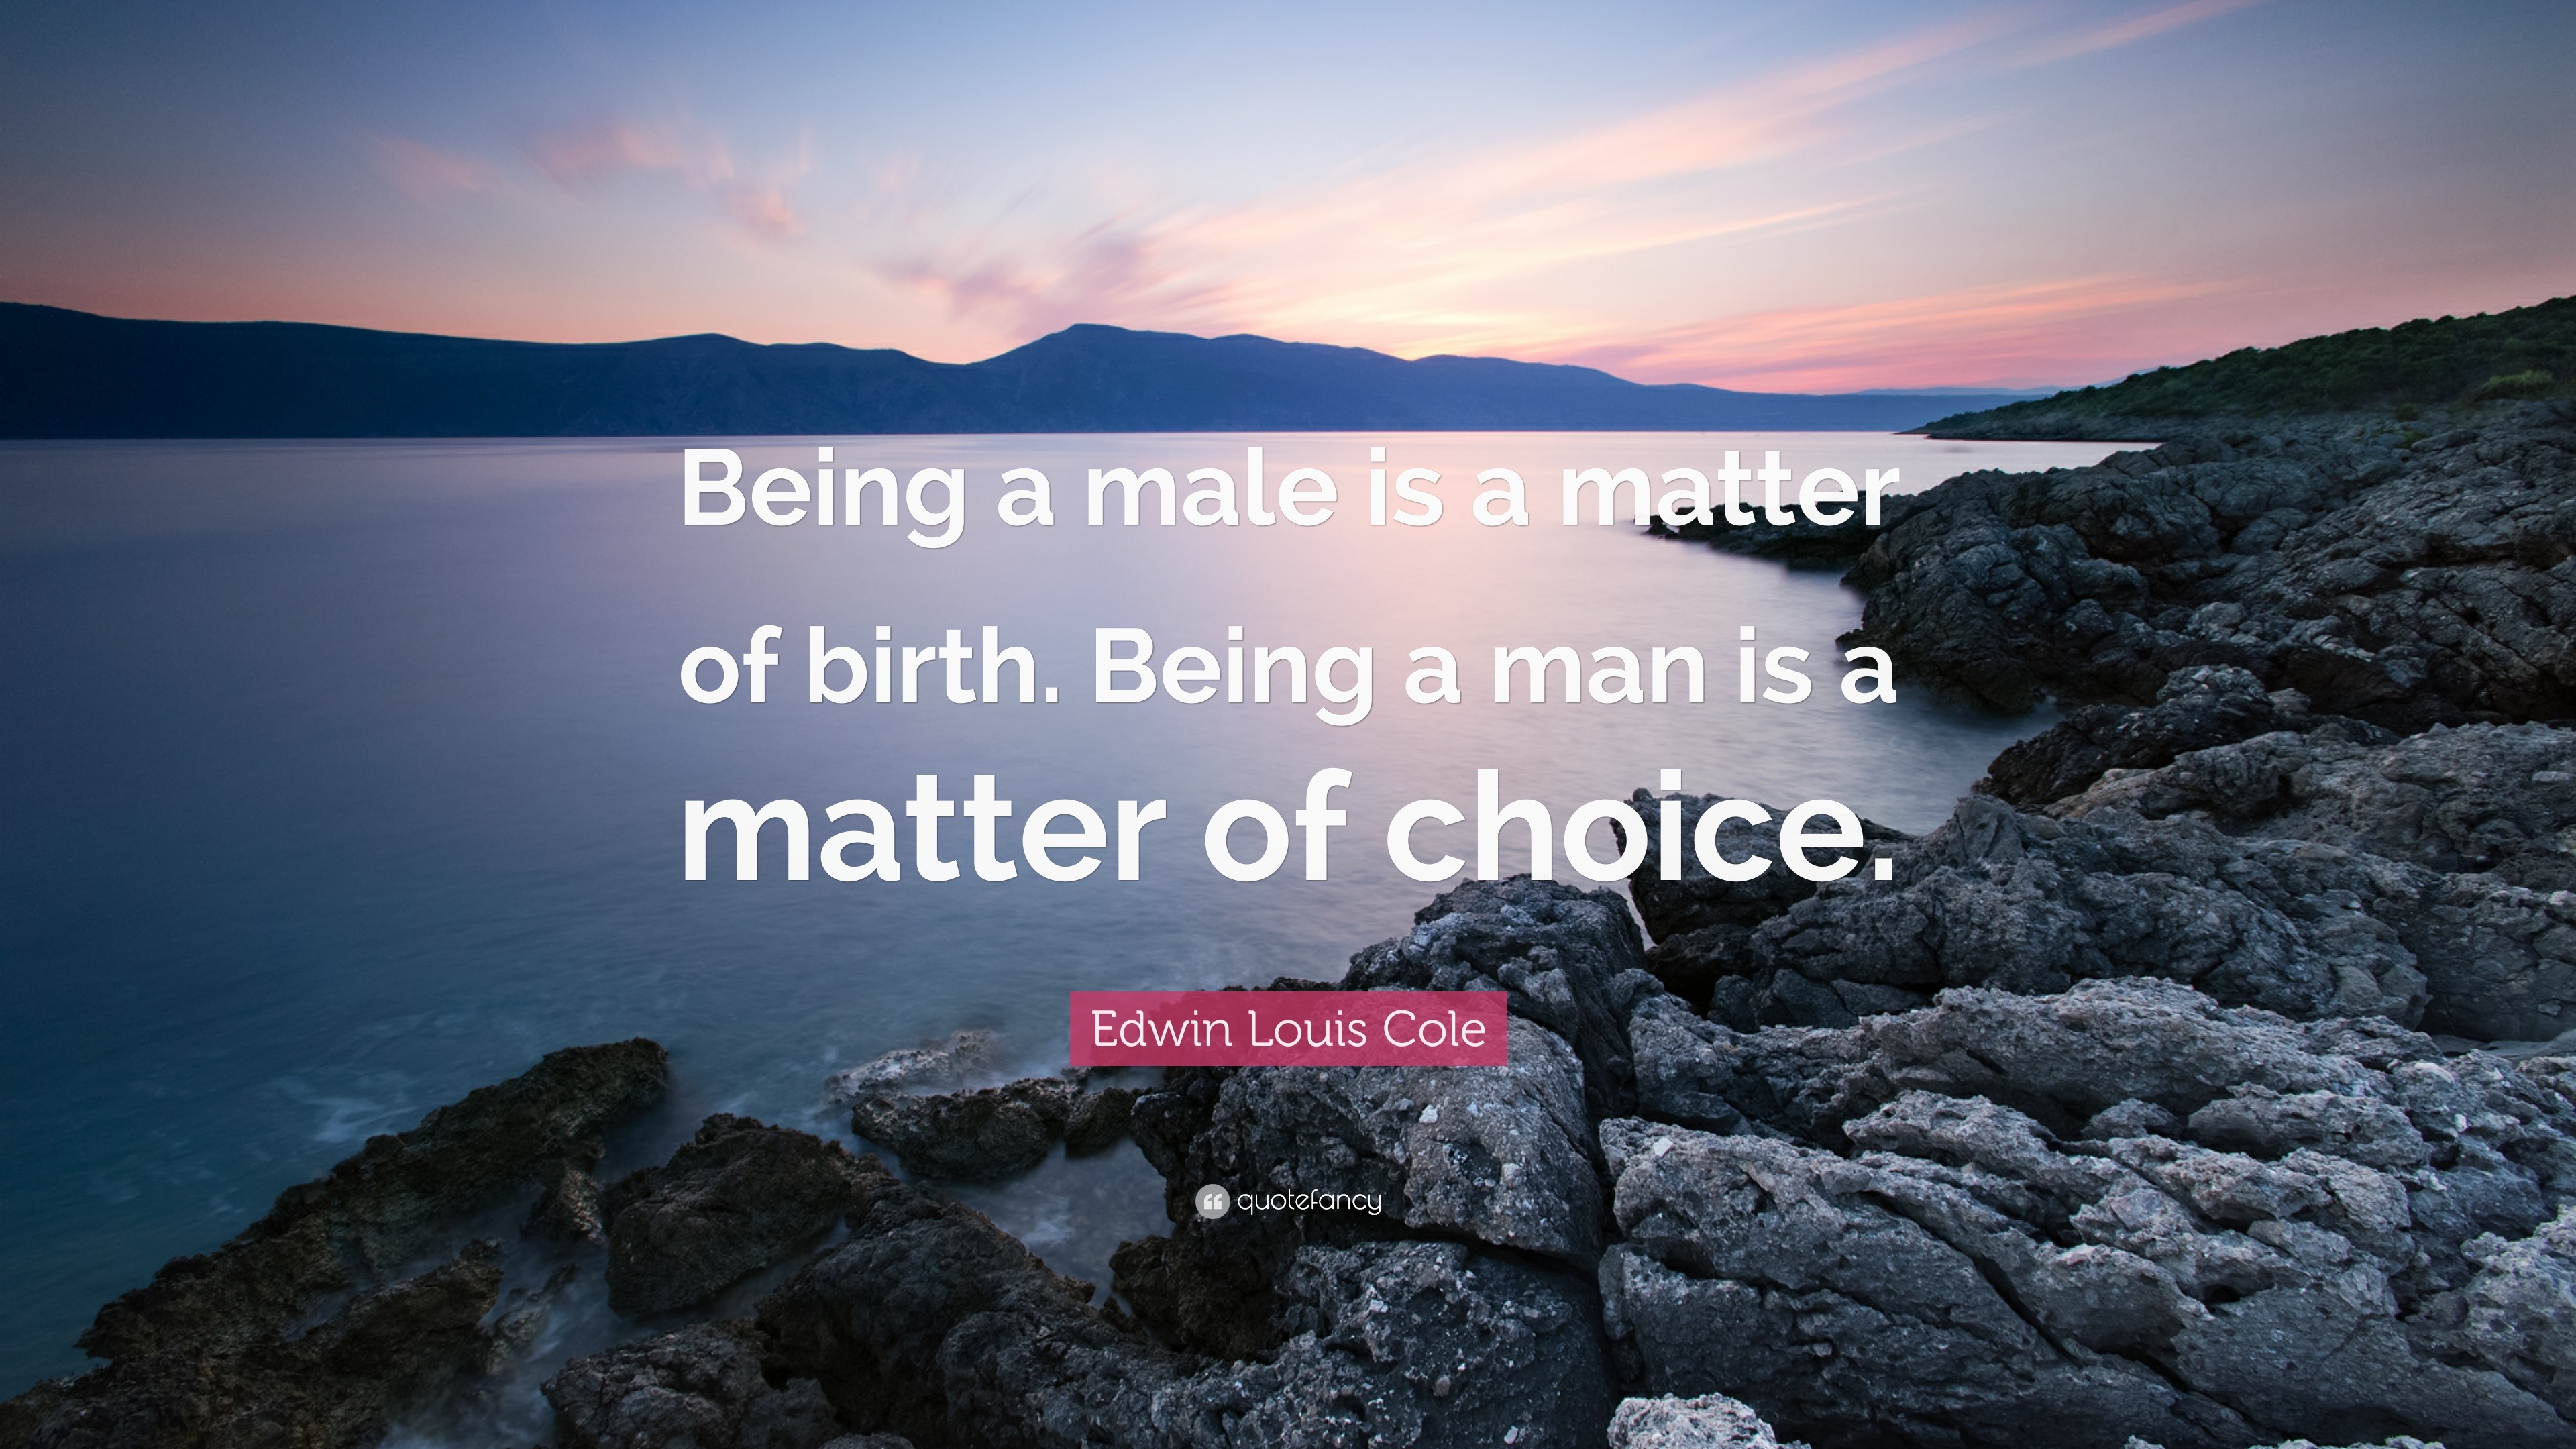 Edwin Louis Cole Quote: “Being a male is a matter of birth. Being